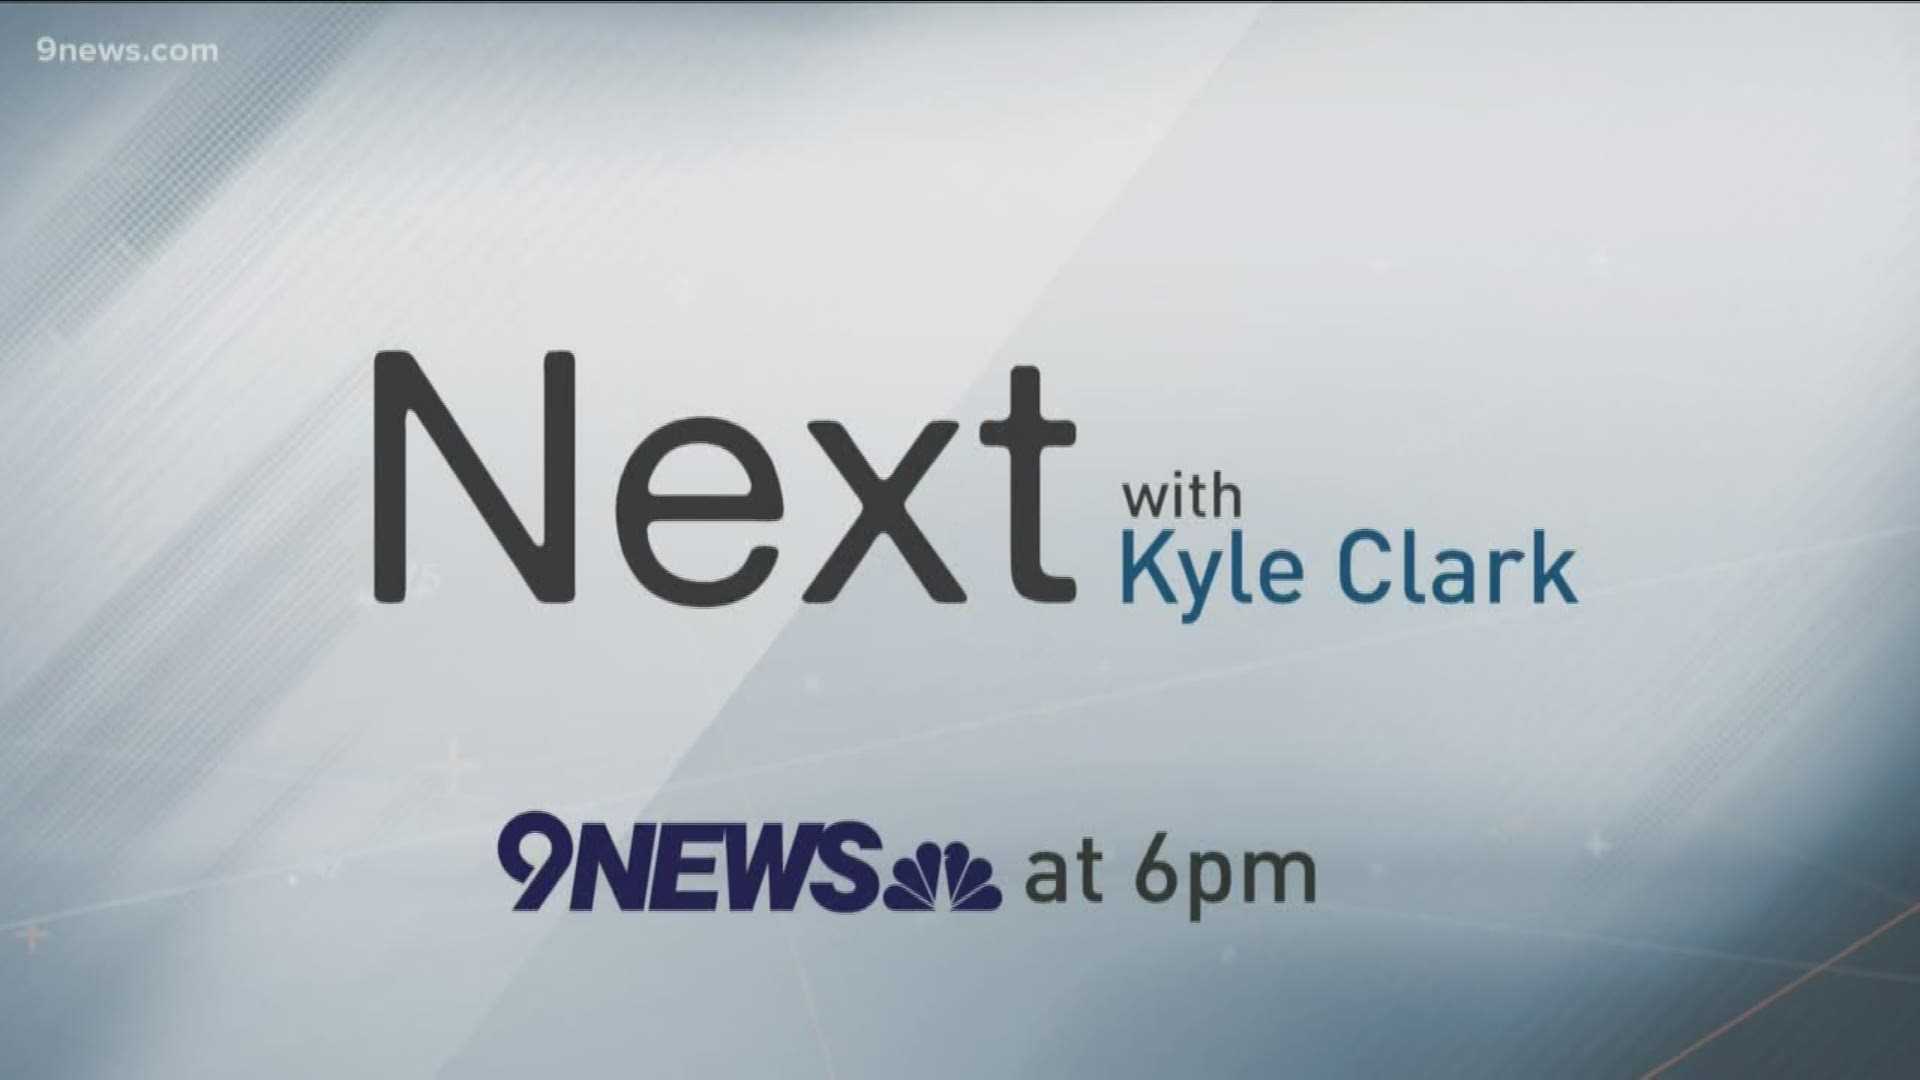 Watch this full episode of Next with Kyle Clark from December 4, 2019.